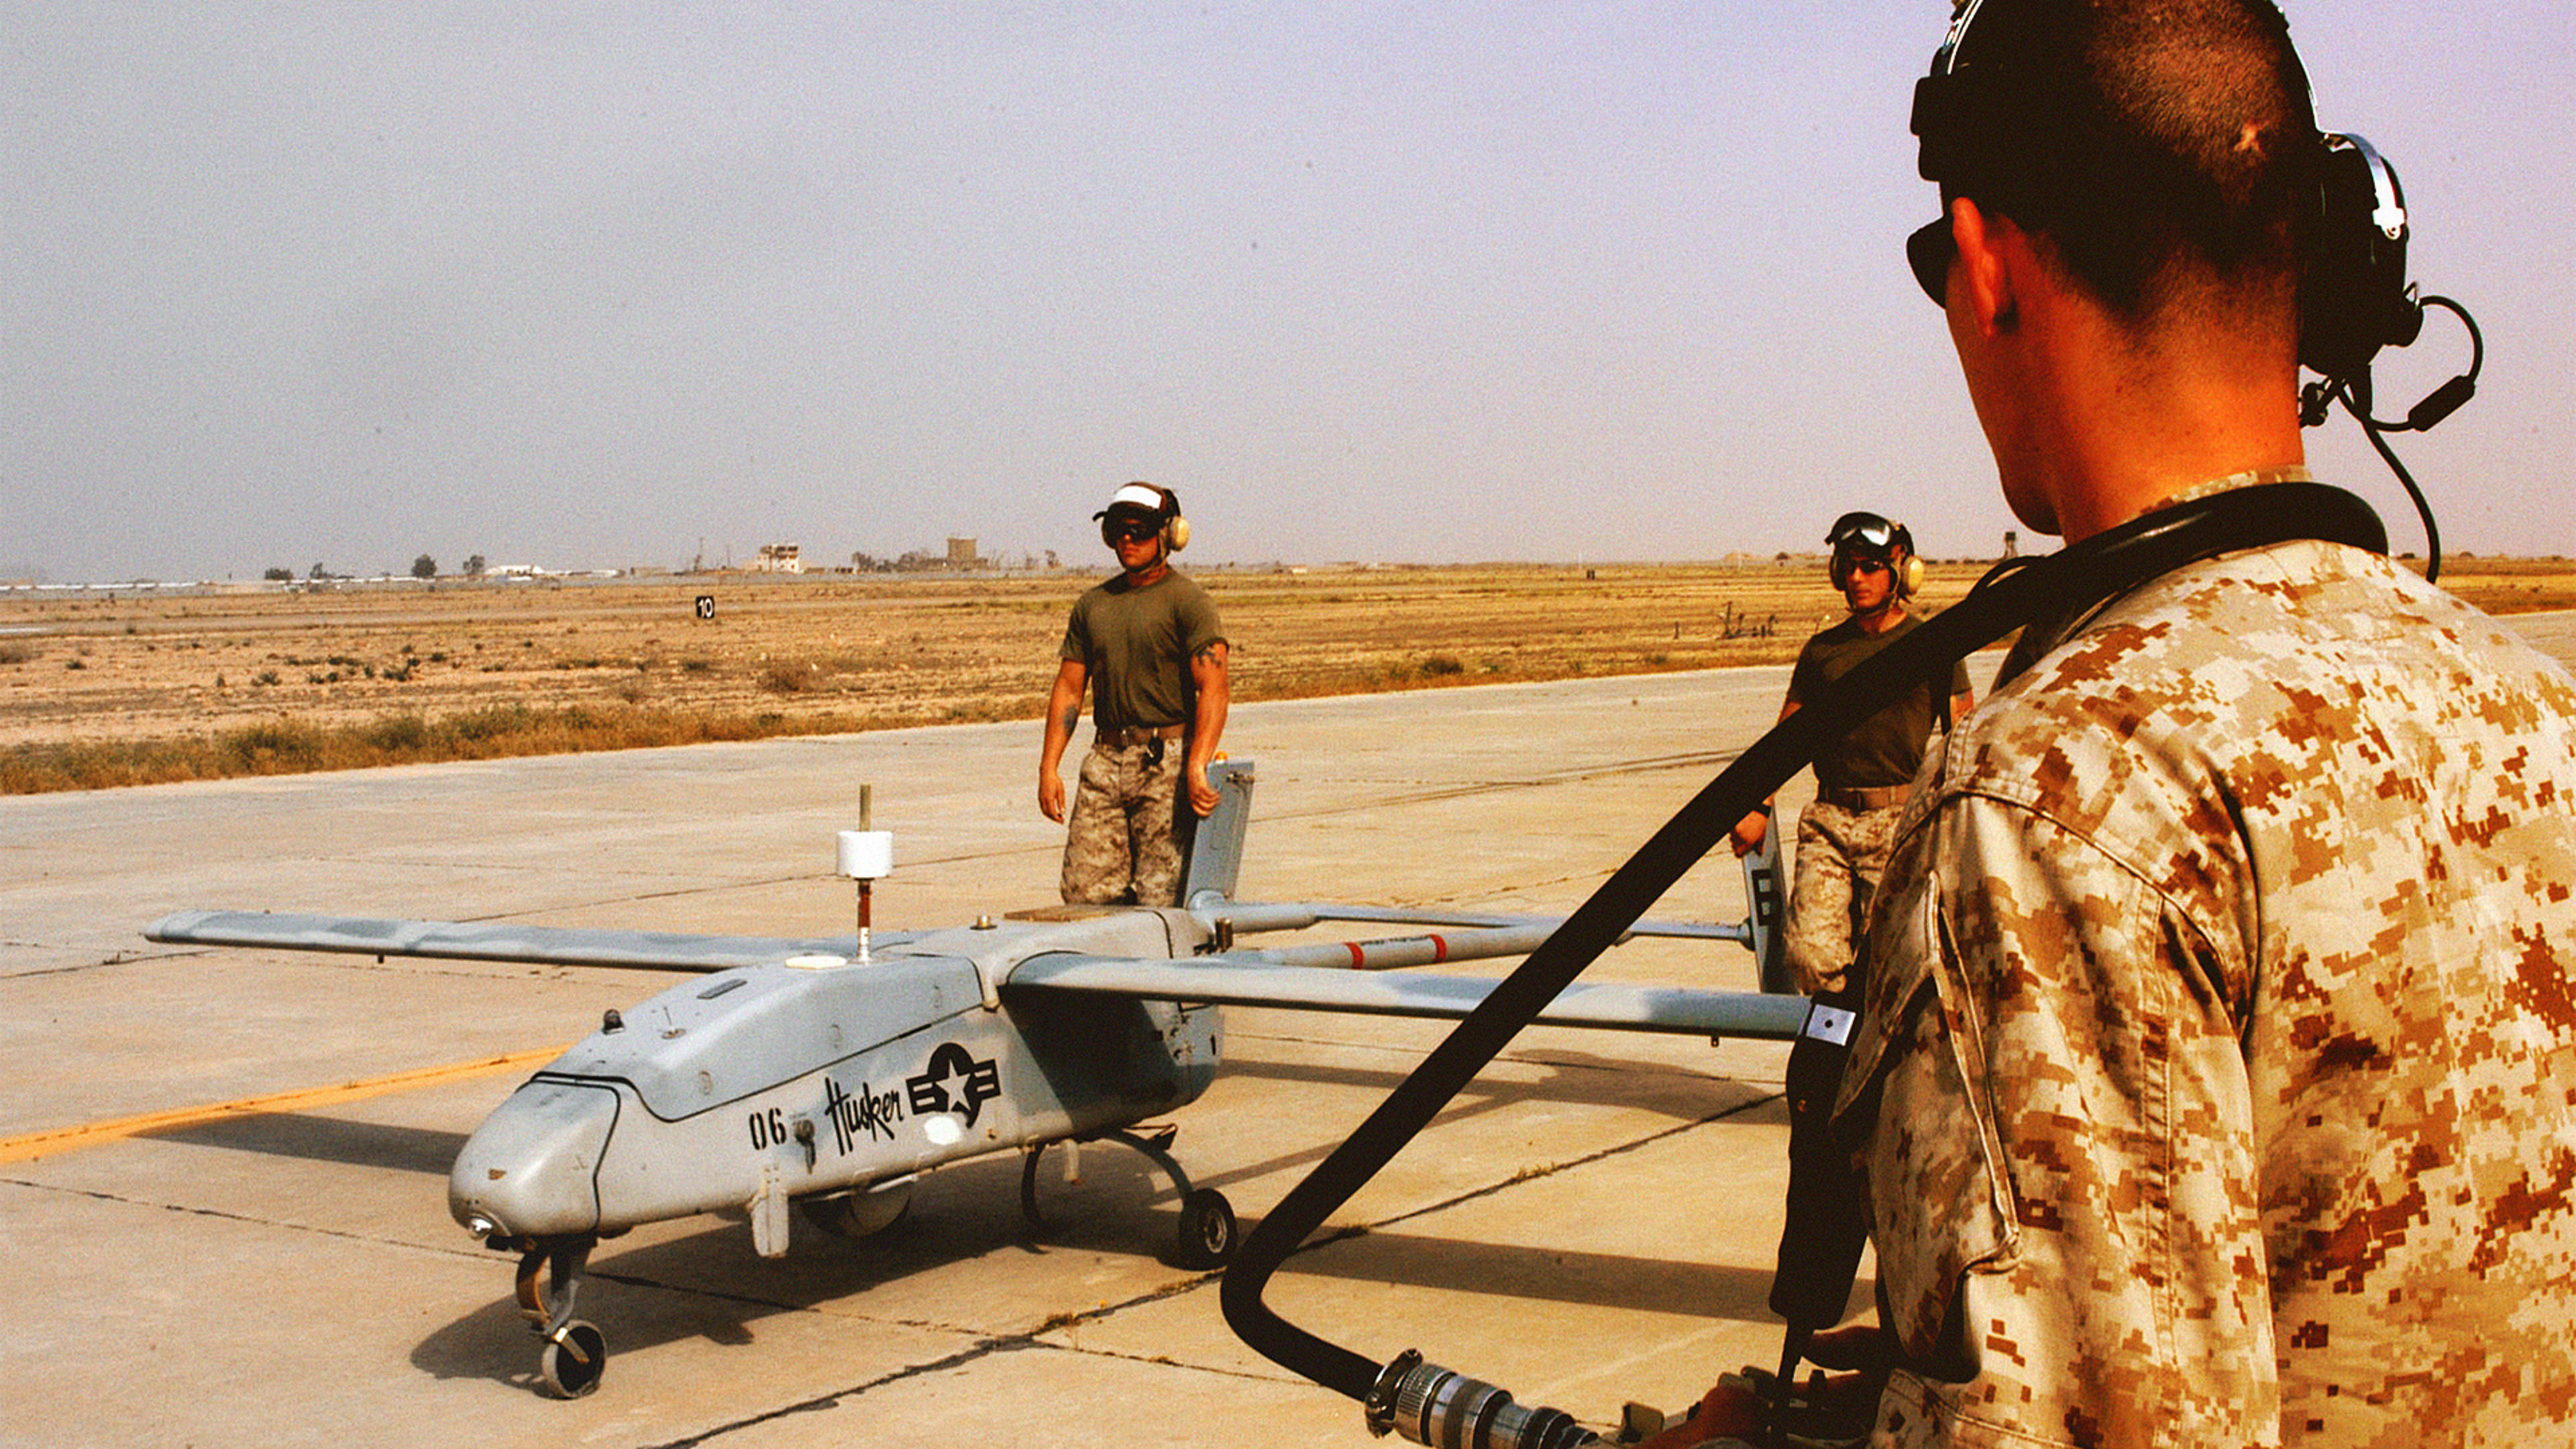 The Radio “Bubble” That Could Shield Soldiers From Terrorist Drones